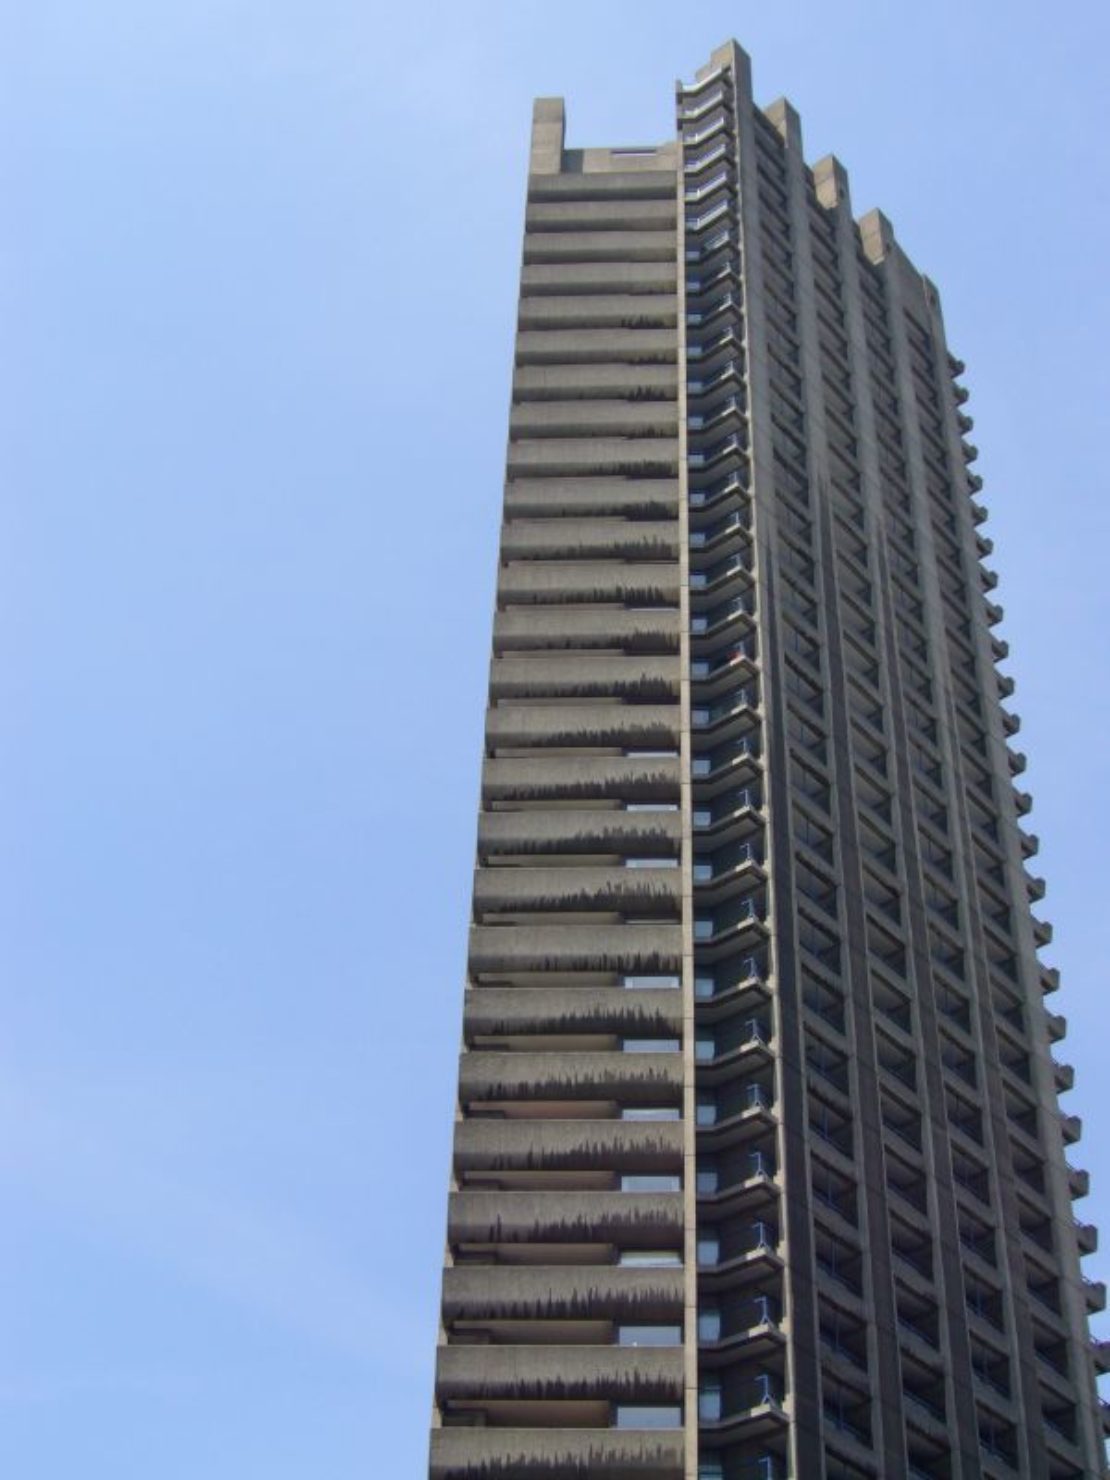 One of the residential towers in the Barbican, London